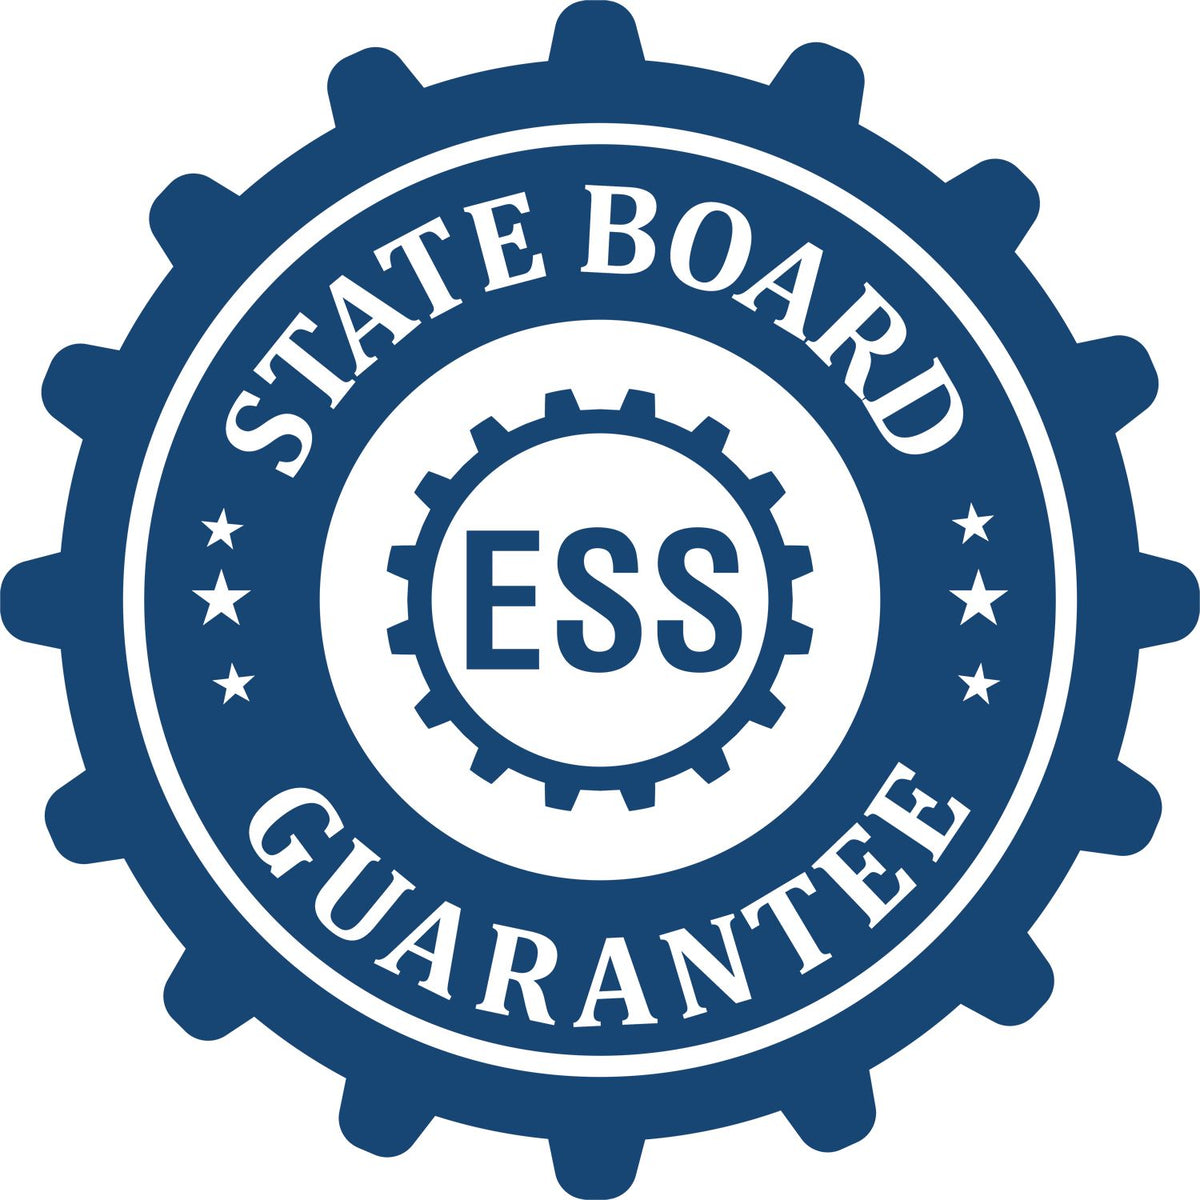 An emblem in a gear shape illustrating a state board guarantee for the Heavy Duty Cast Iron Colorado Geologist Seal Embosser